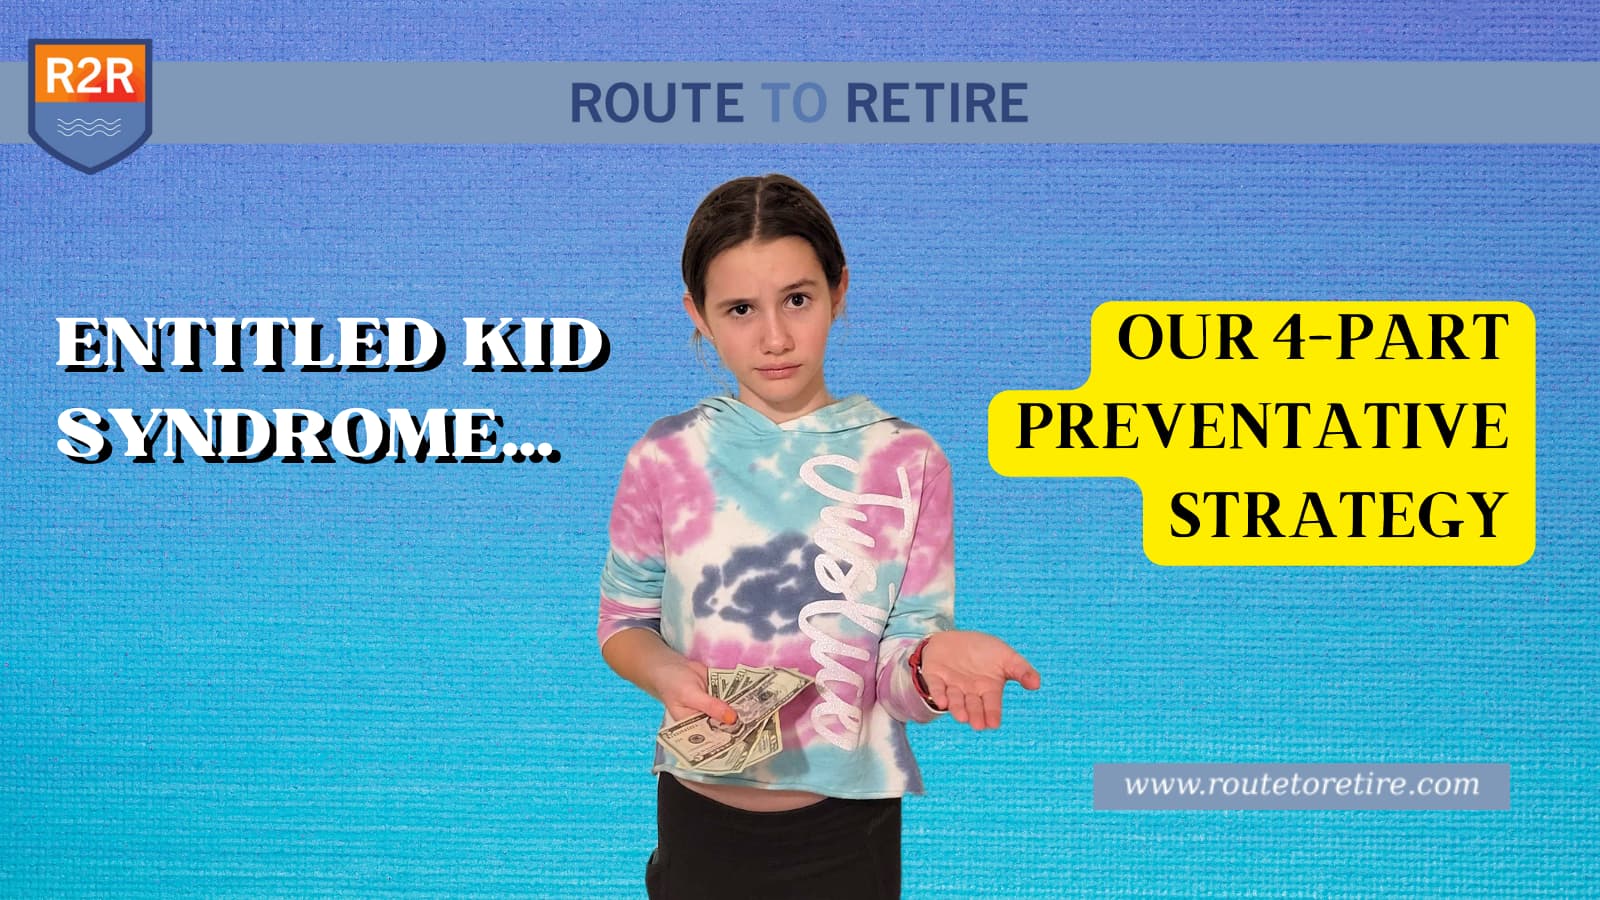 Entitled Kid Syndrome… Our 4-Part Preventative Strategy Entitled Kid Syndrome…